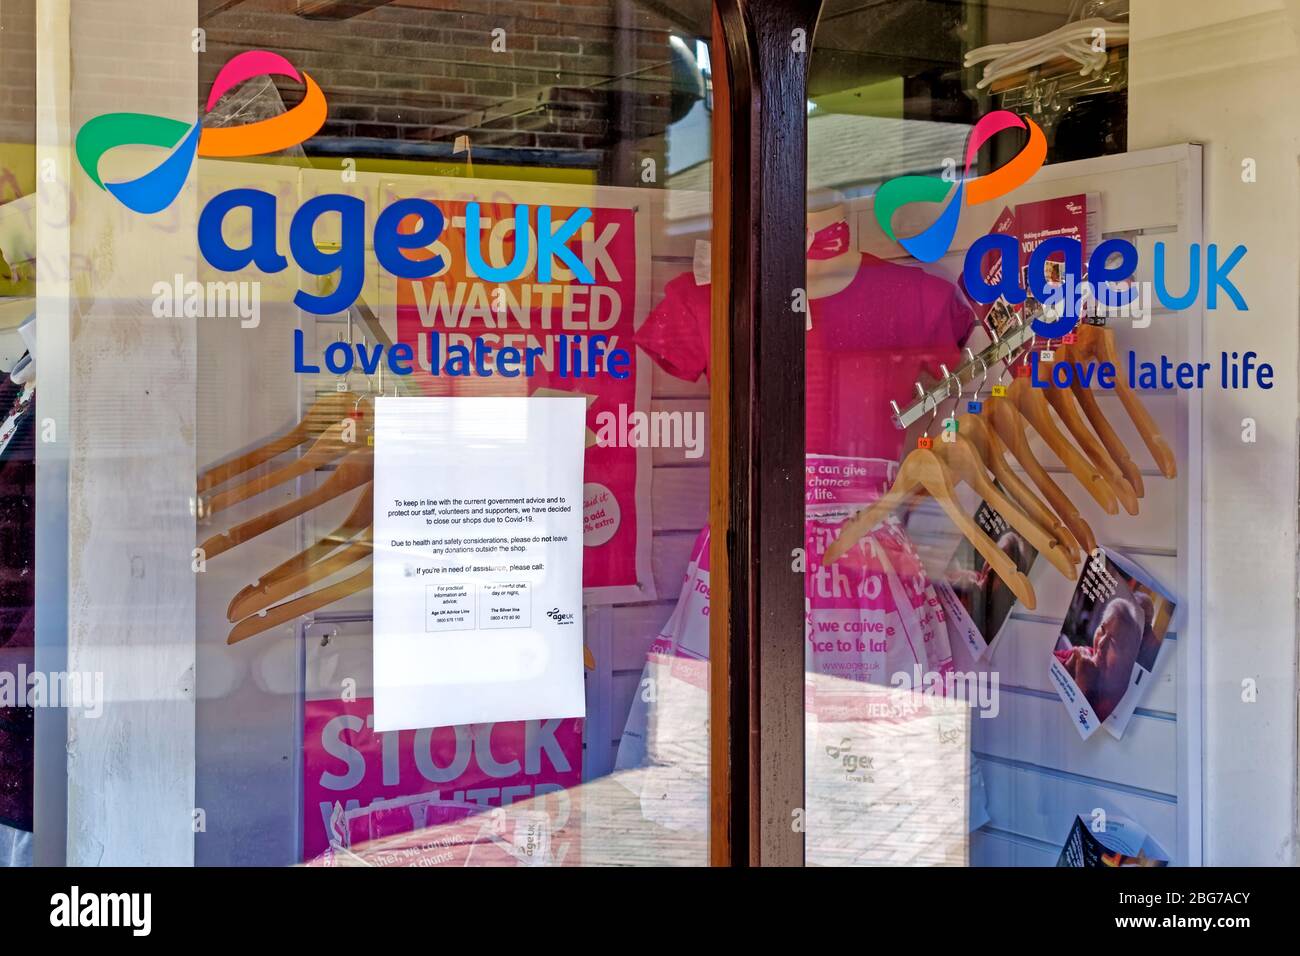 Warminster, Wiltshire / UK - April 14 2019: A Closed due to Coronavirus sign in the window of the Age UK Charity Shop in Warminster, Wiltshire, UK Stock Photo